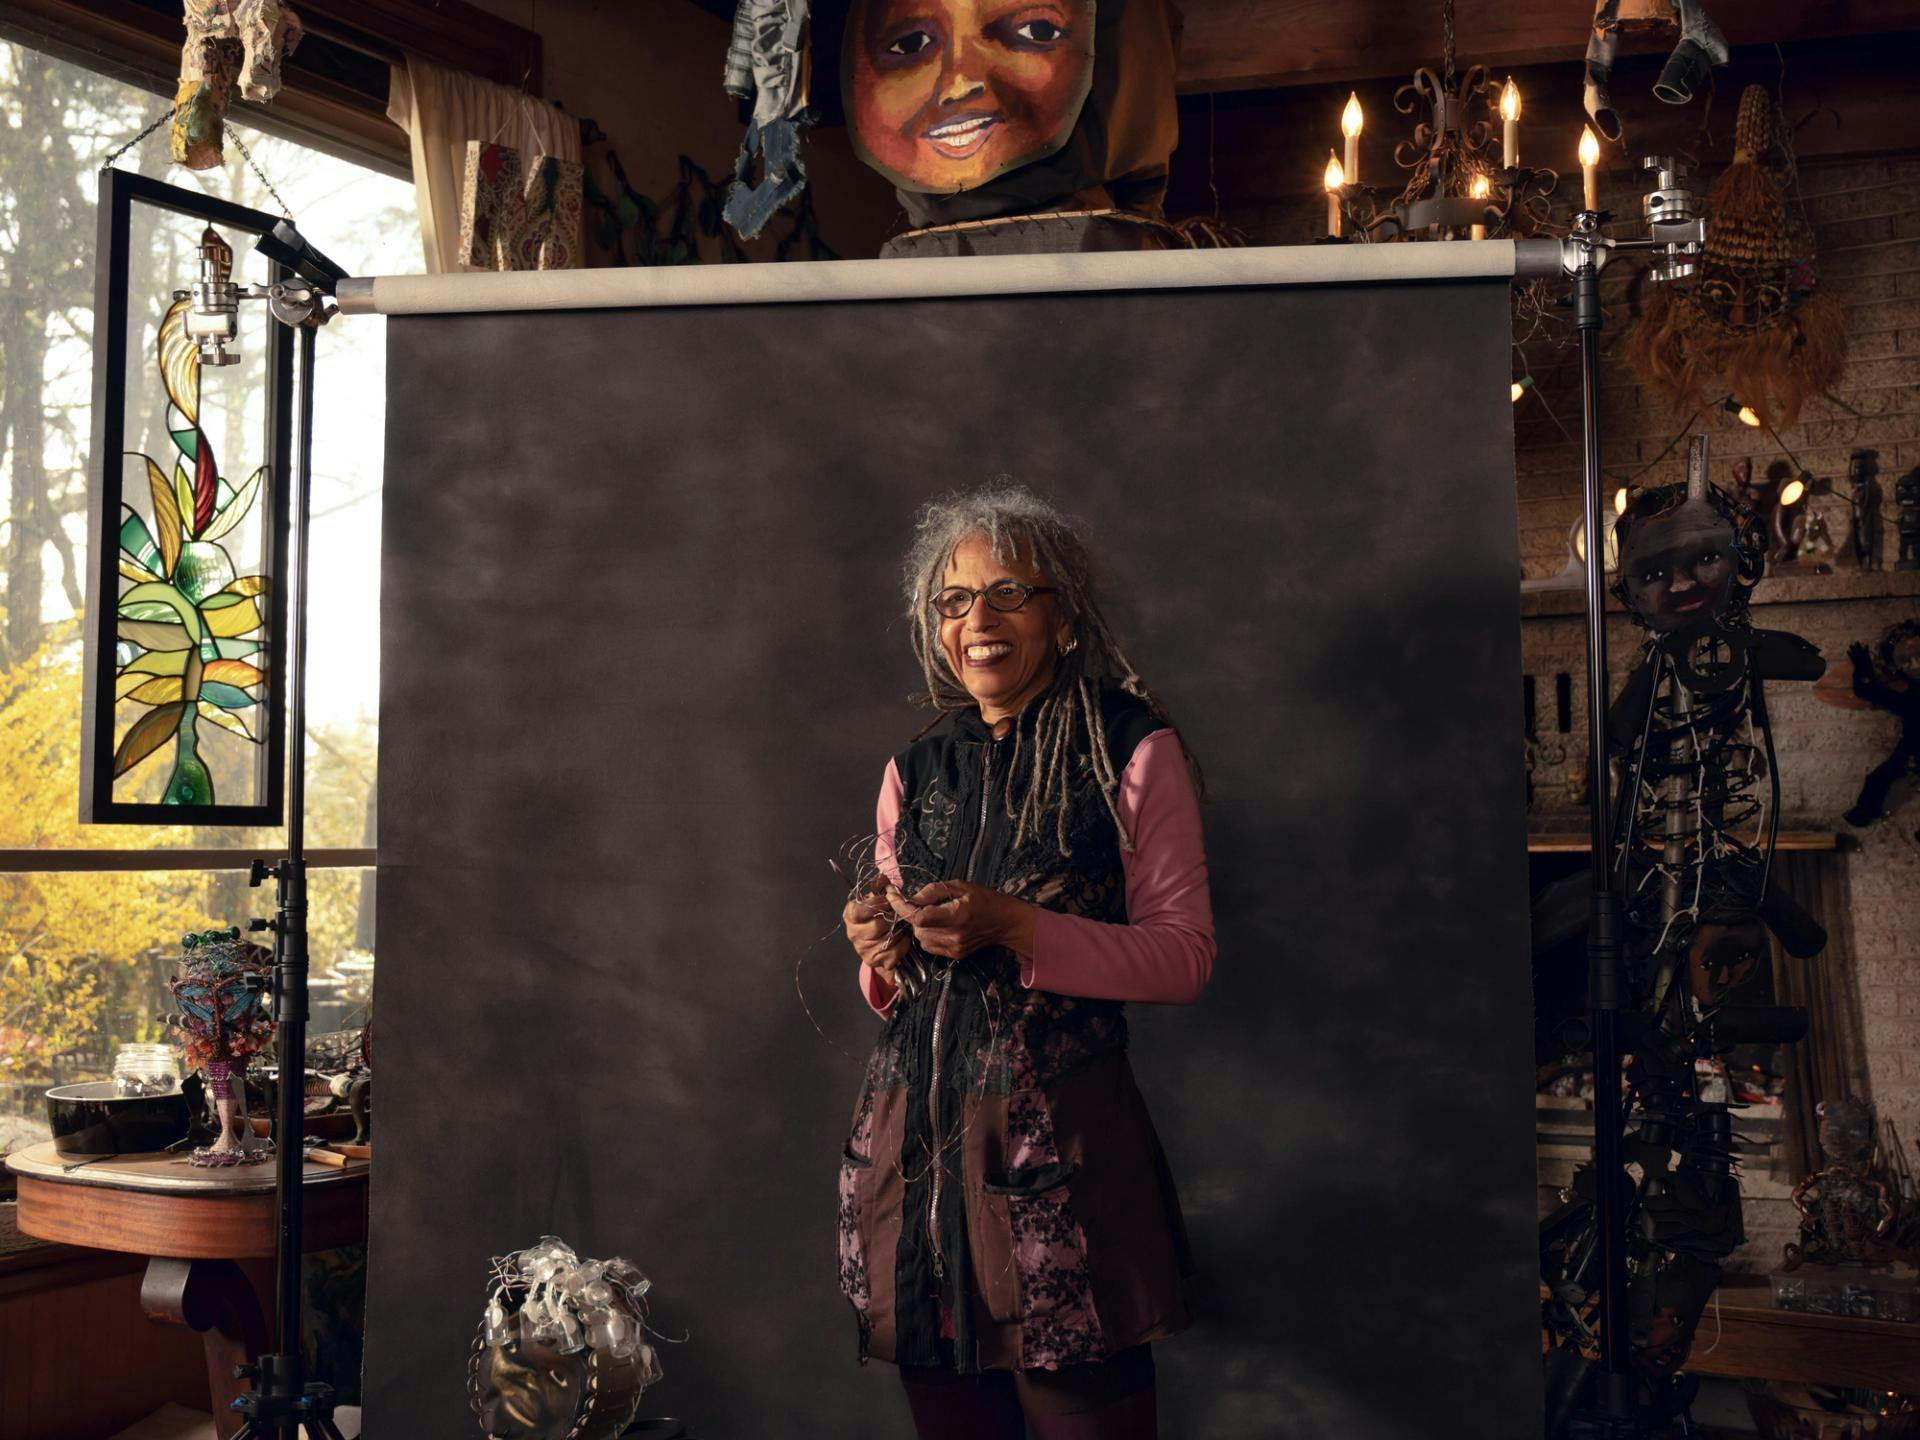 Person with glasses poses in front of a black backdrop in art studio full of objects